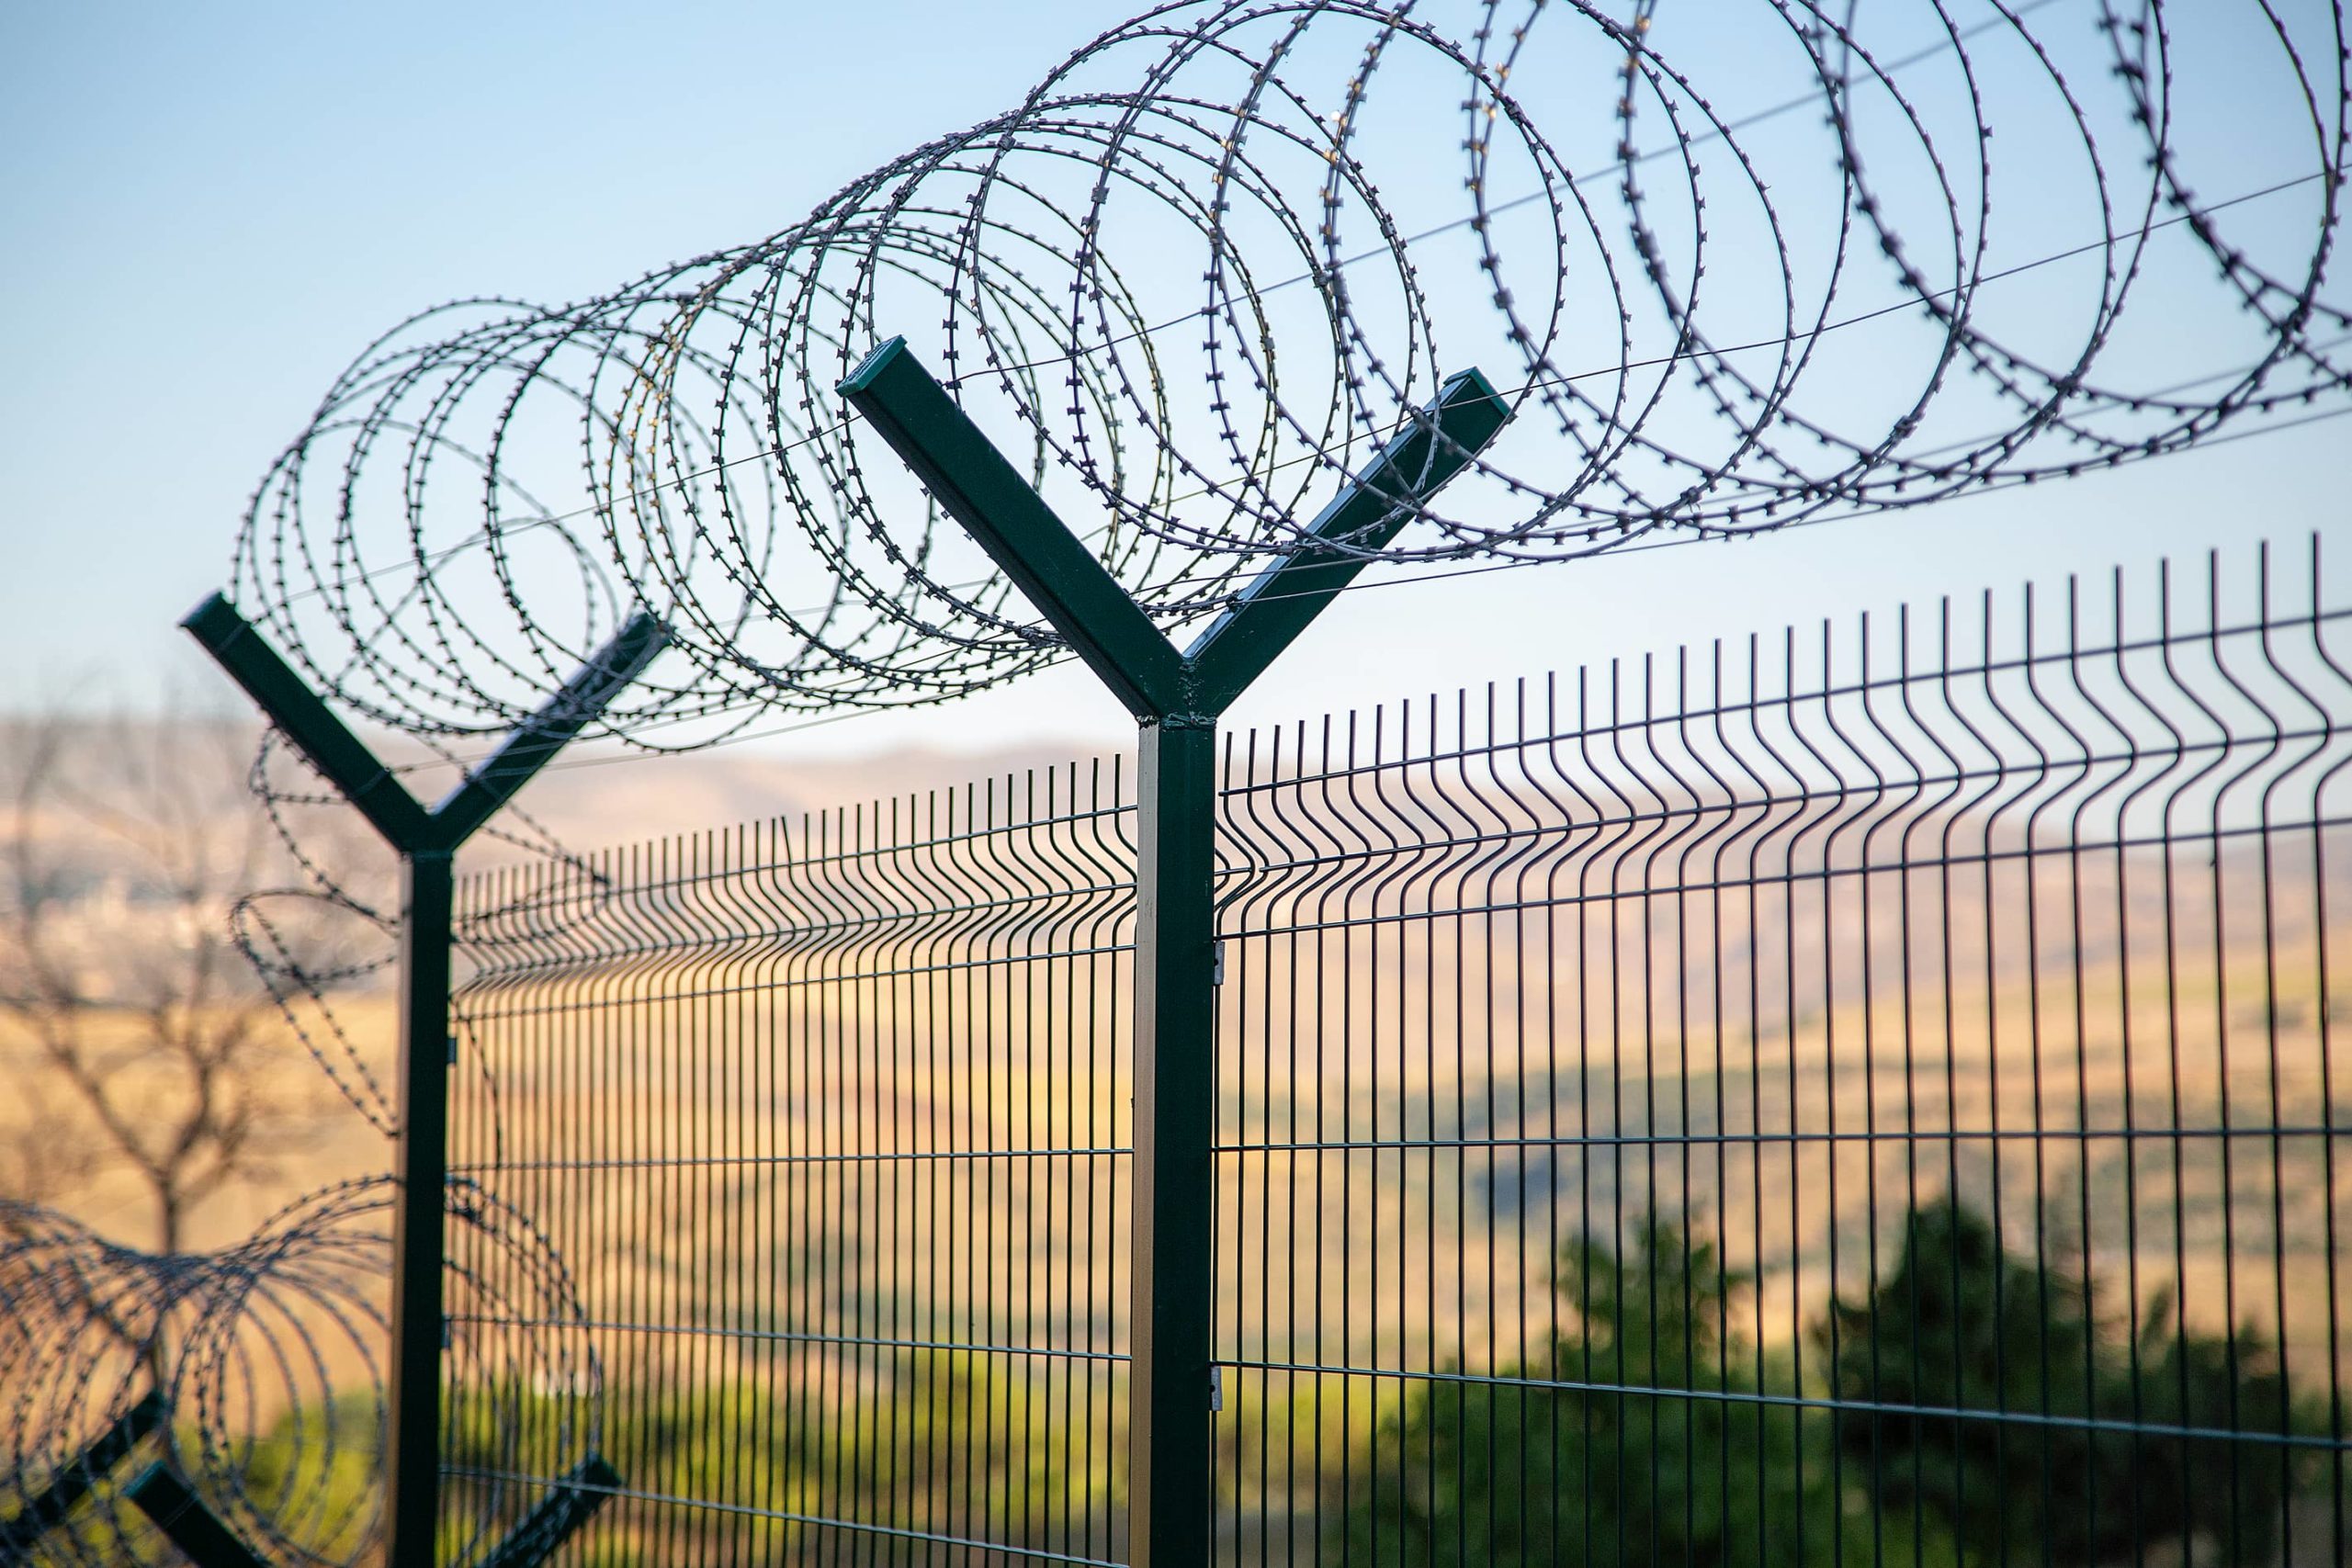 This image shows a metal security fence with curled barbed wire on top.